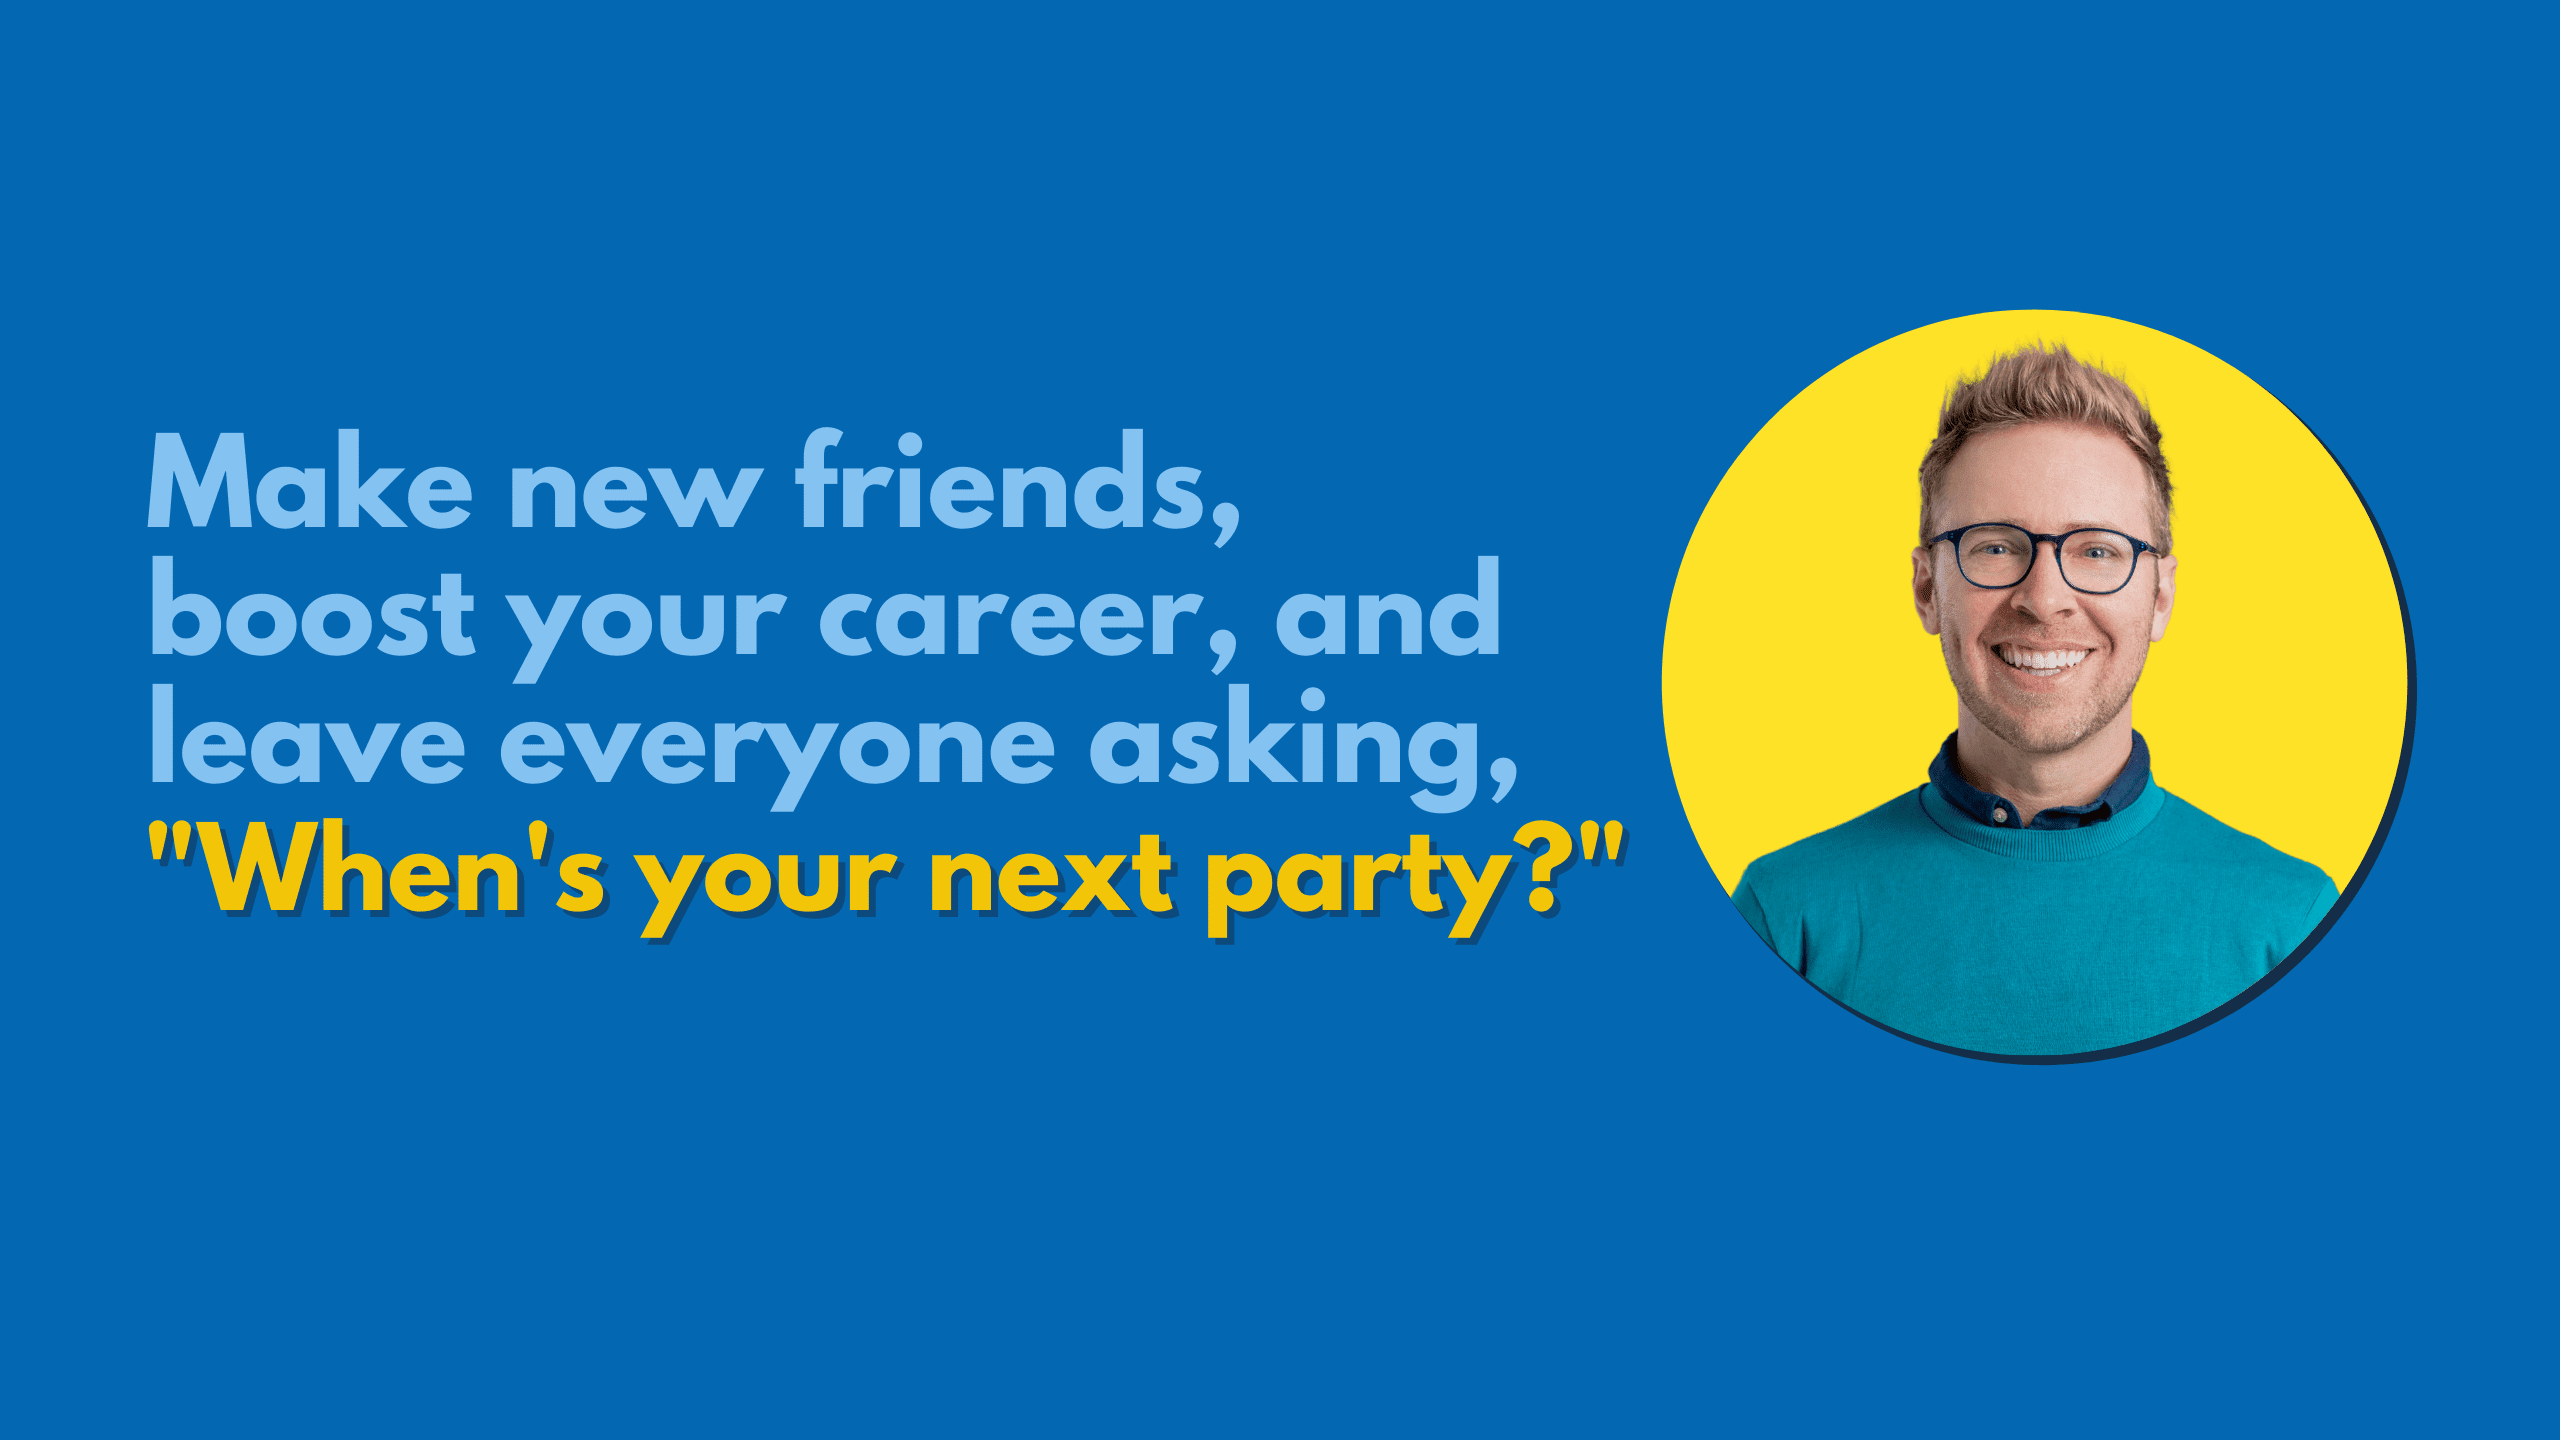 Graphic with a saying "Make new friends, boost you career, and leave everyone asking, 'When's your next party?'" with Nick beside.